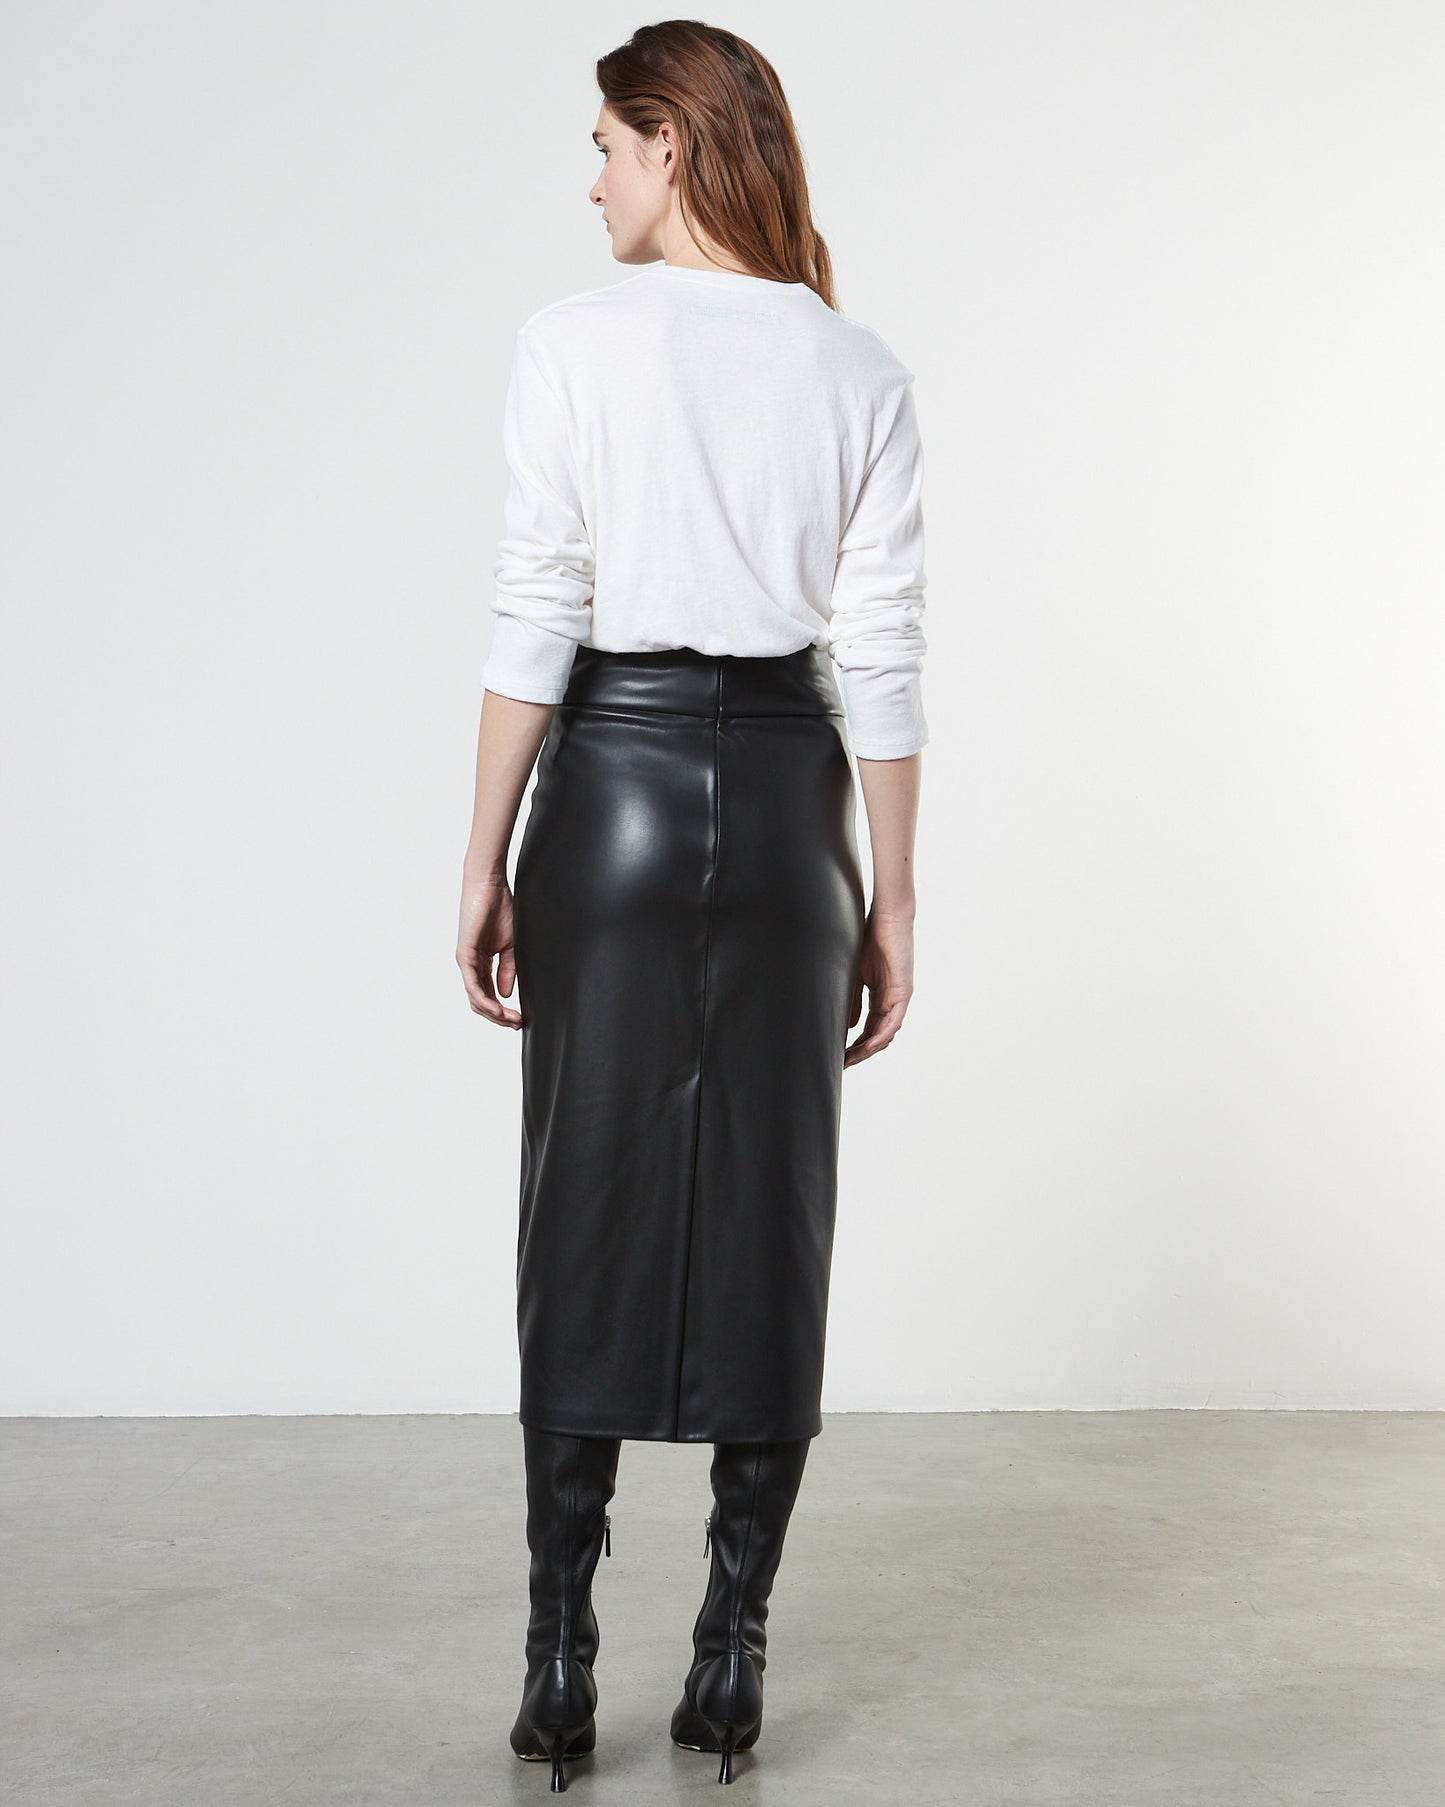 Enza Costa Soft Leather Pencil Skirt